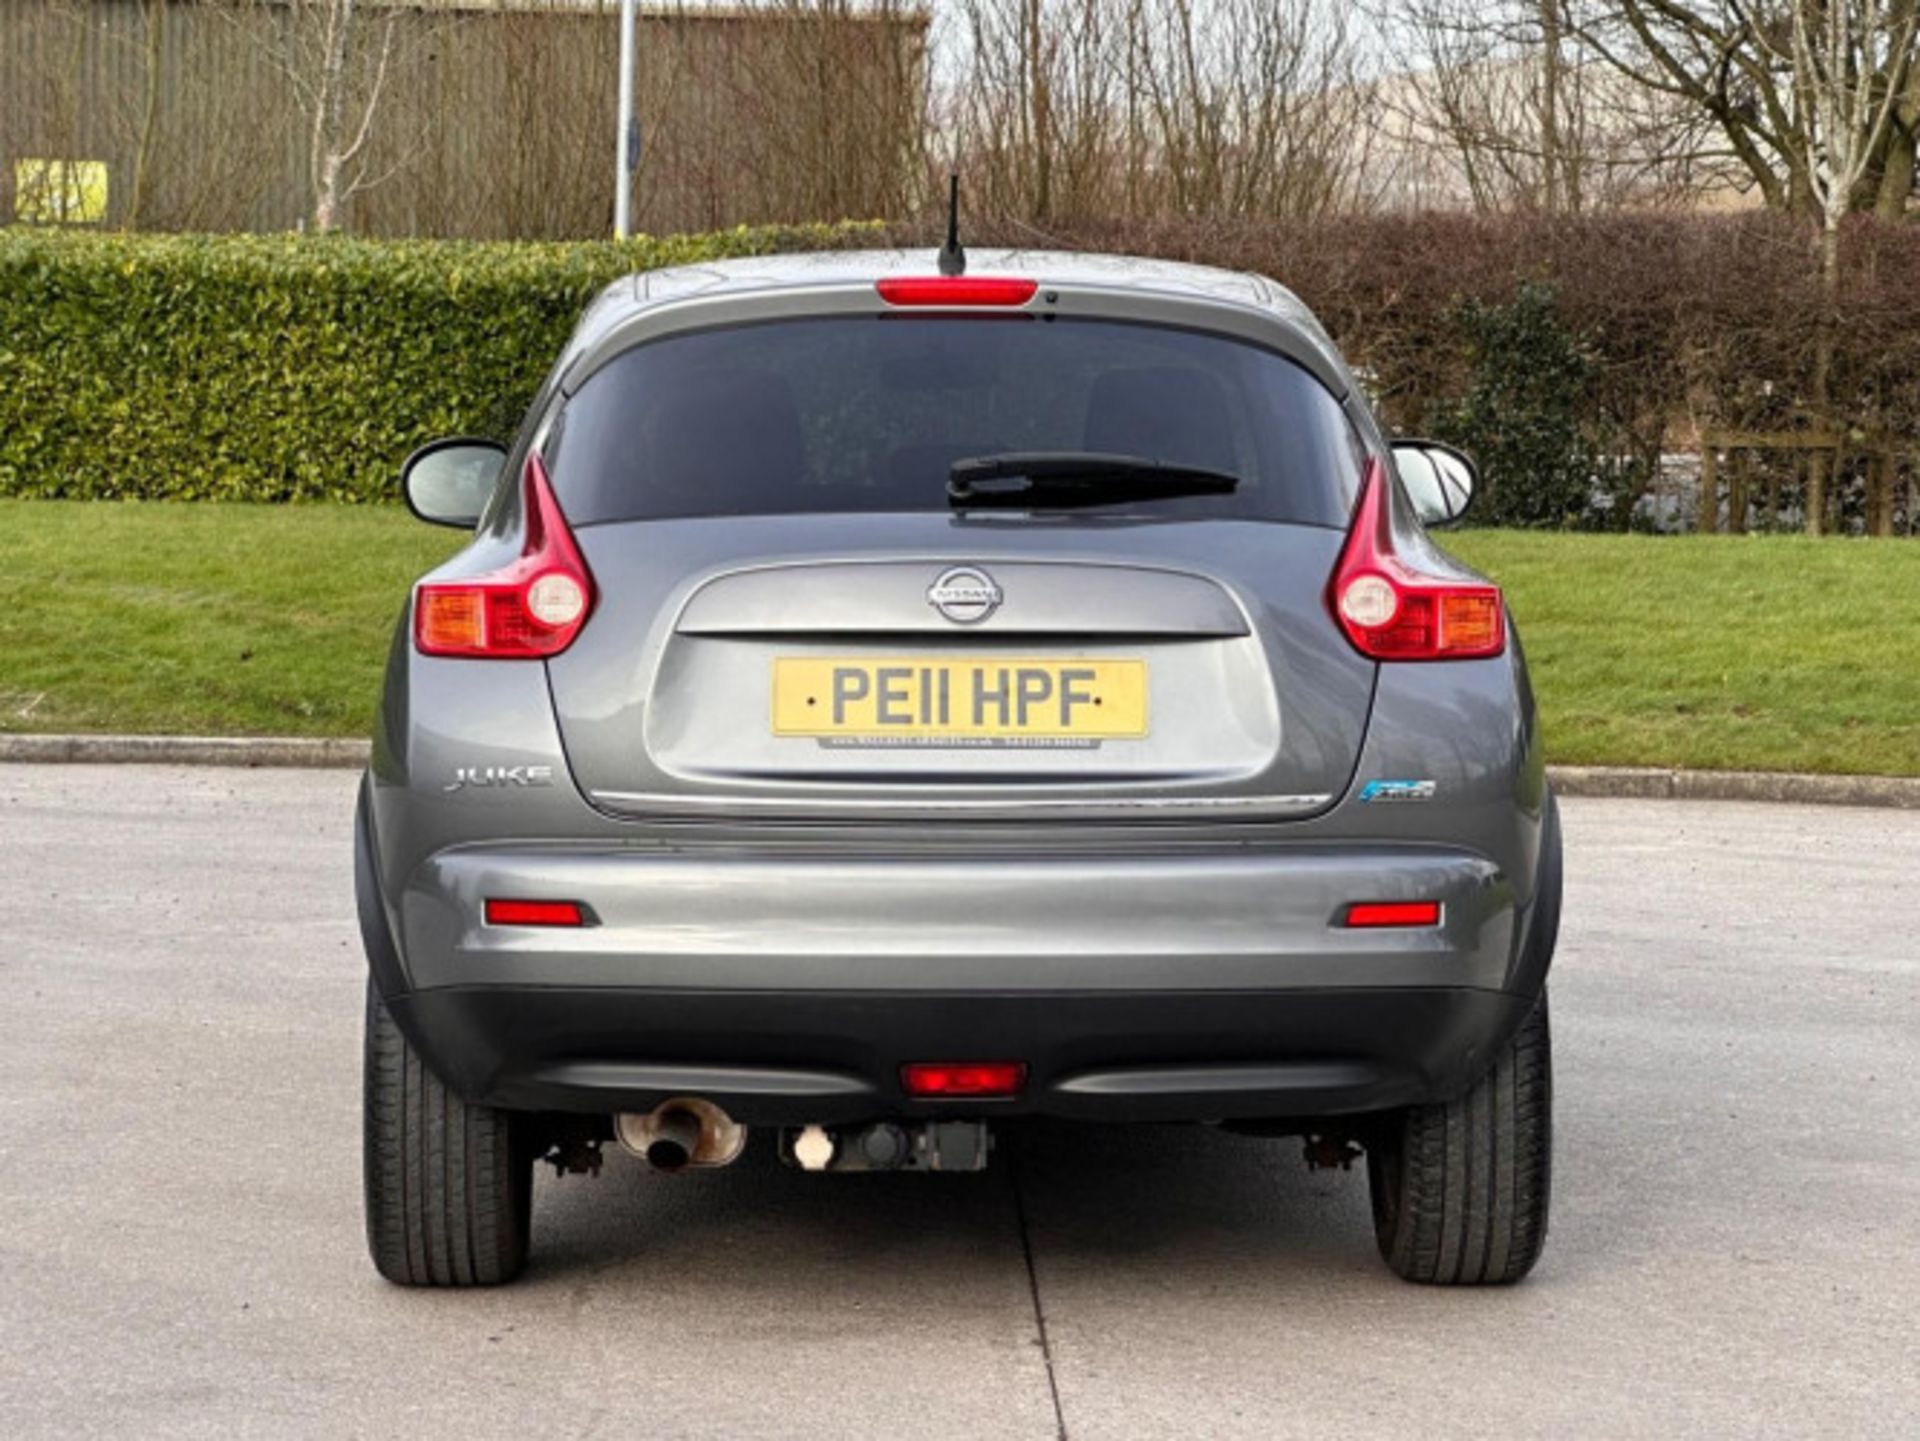 >>--NO VAT ON HAMMER--<< NISSAN JUKE 1.5 DCI ACENTA SPORT: A PRACTICAL AND SPORTY SUV - Image 96 of 97